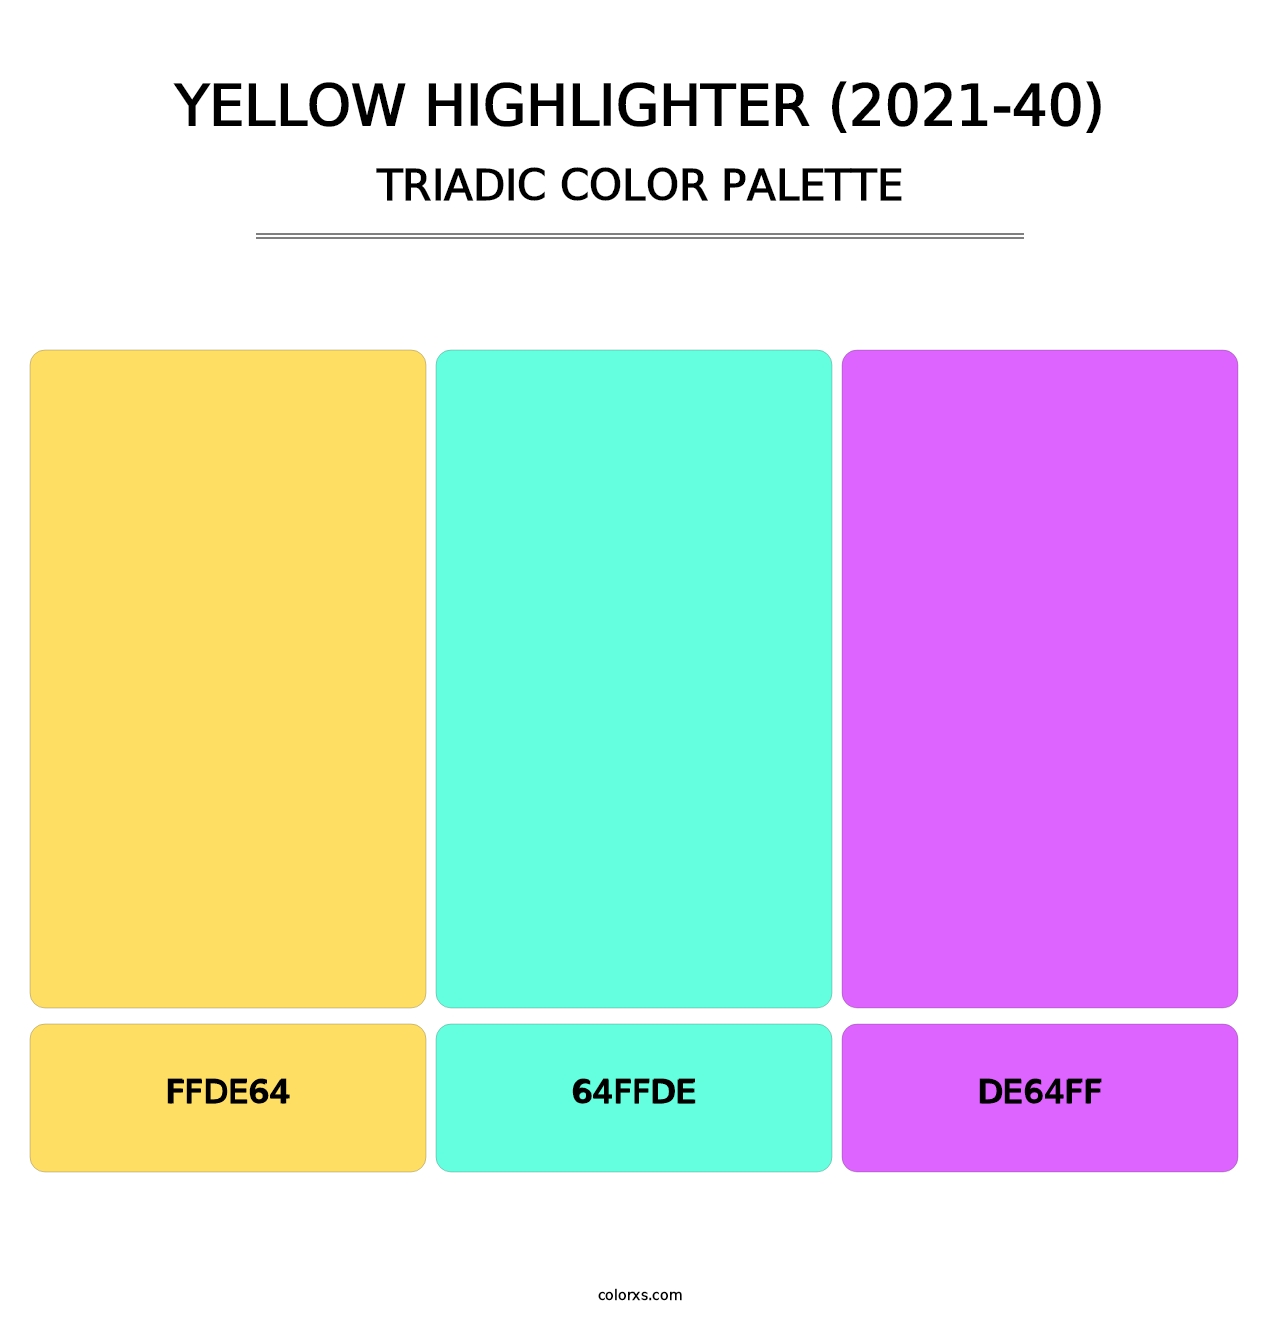 Yellow Highlighter (2021-40) - Triadic Color Palette